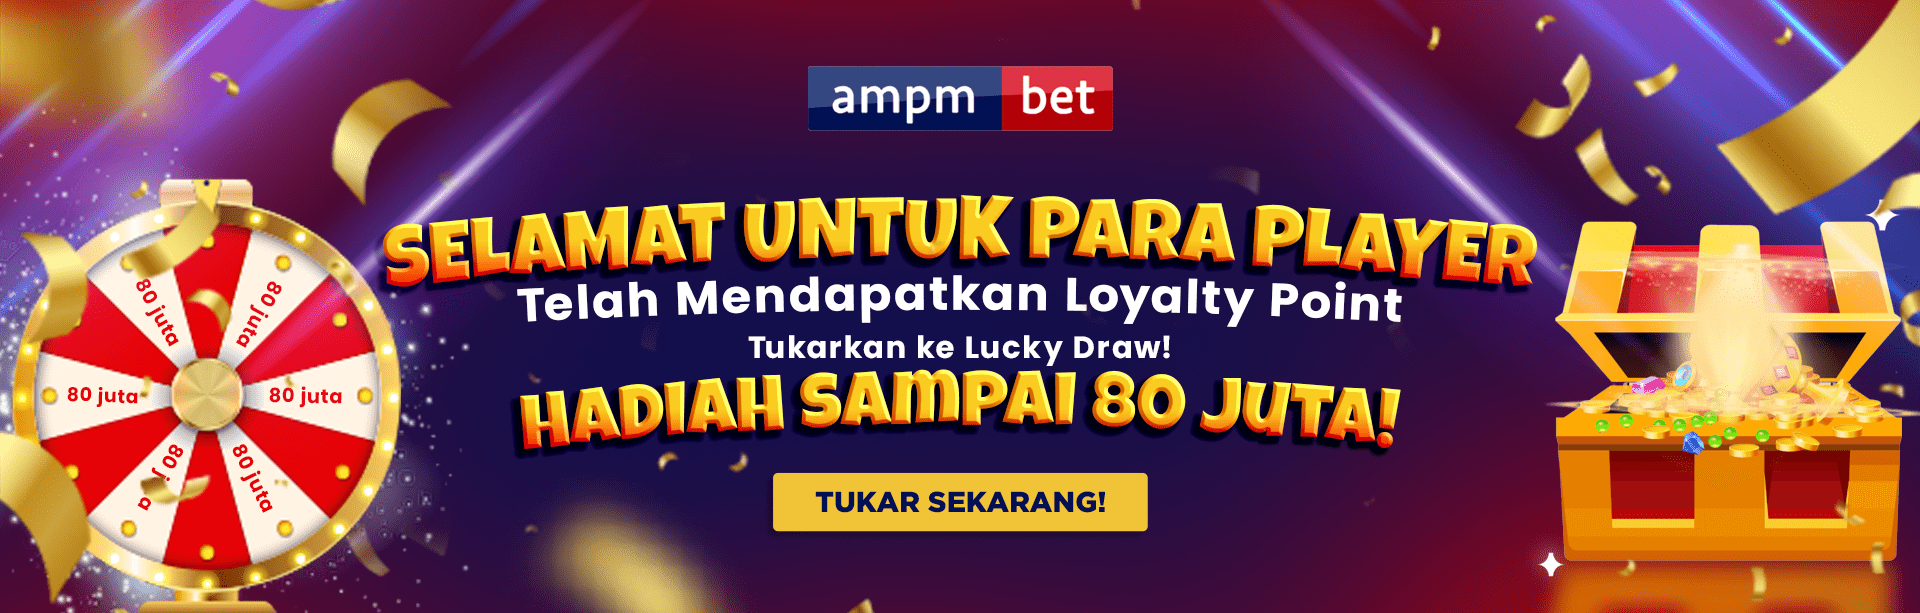 Promo Loyalty Point